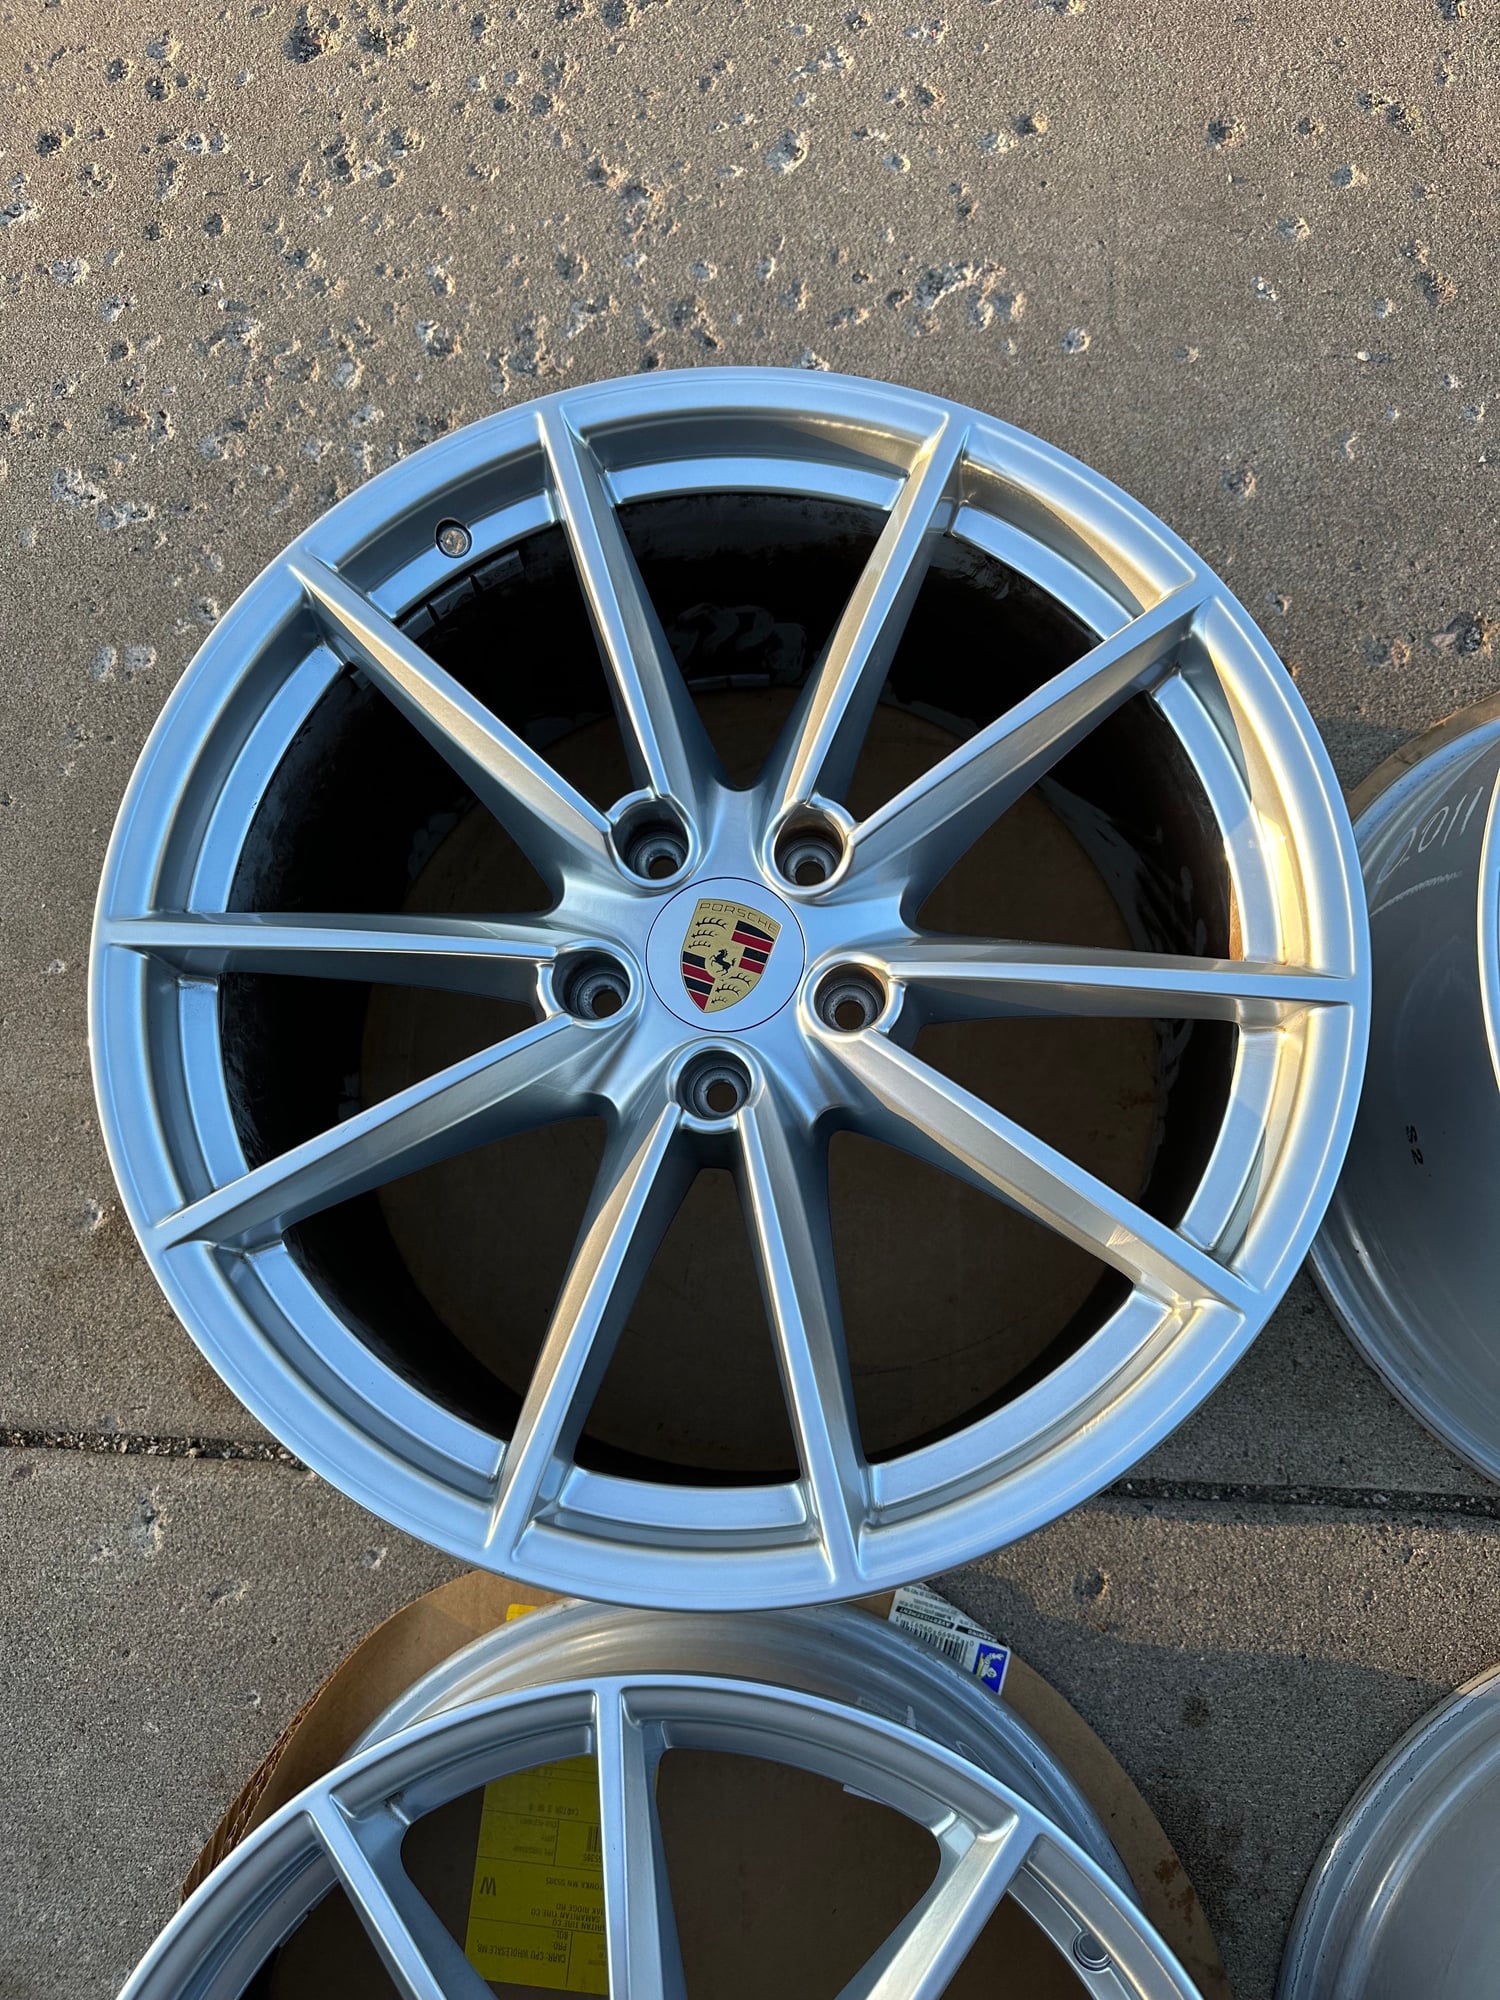 2020 Porsche Cayenne - 20/21" 992 Carrera S Summer Wheels - Silver - Excellent Condition - 991 997 - Wheels and Tires/Axles - $2,950 - Plymouth, MN 55447, United States